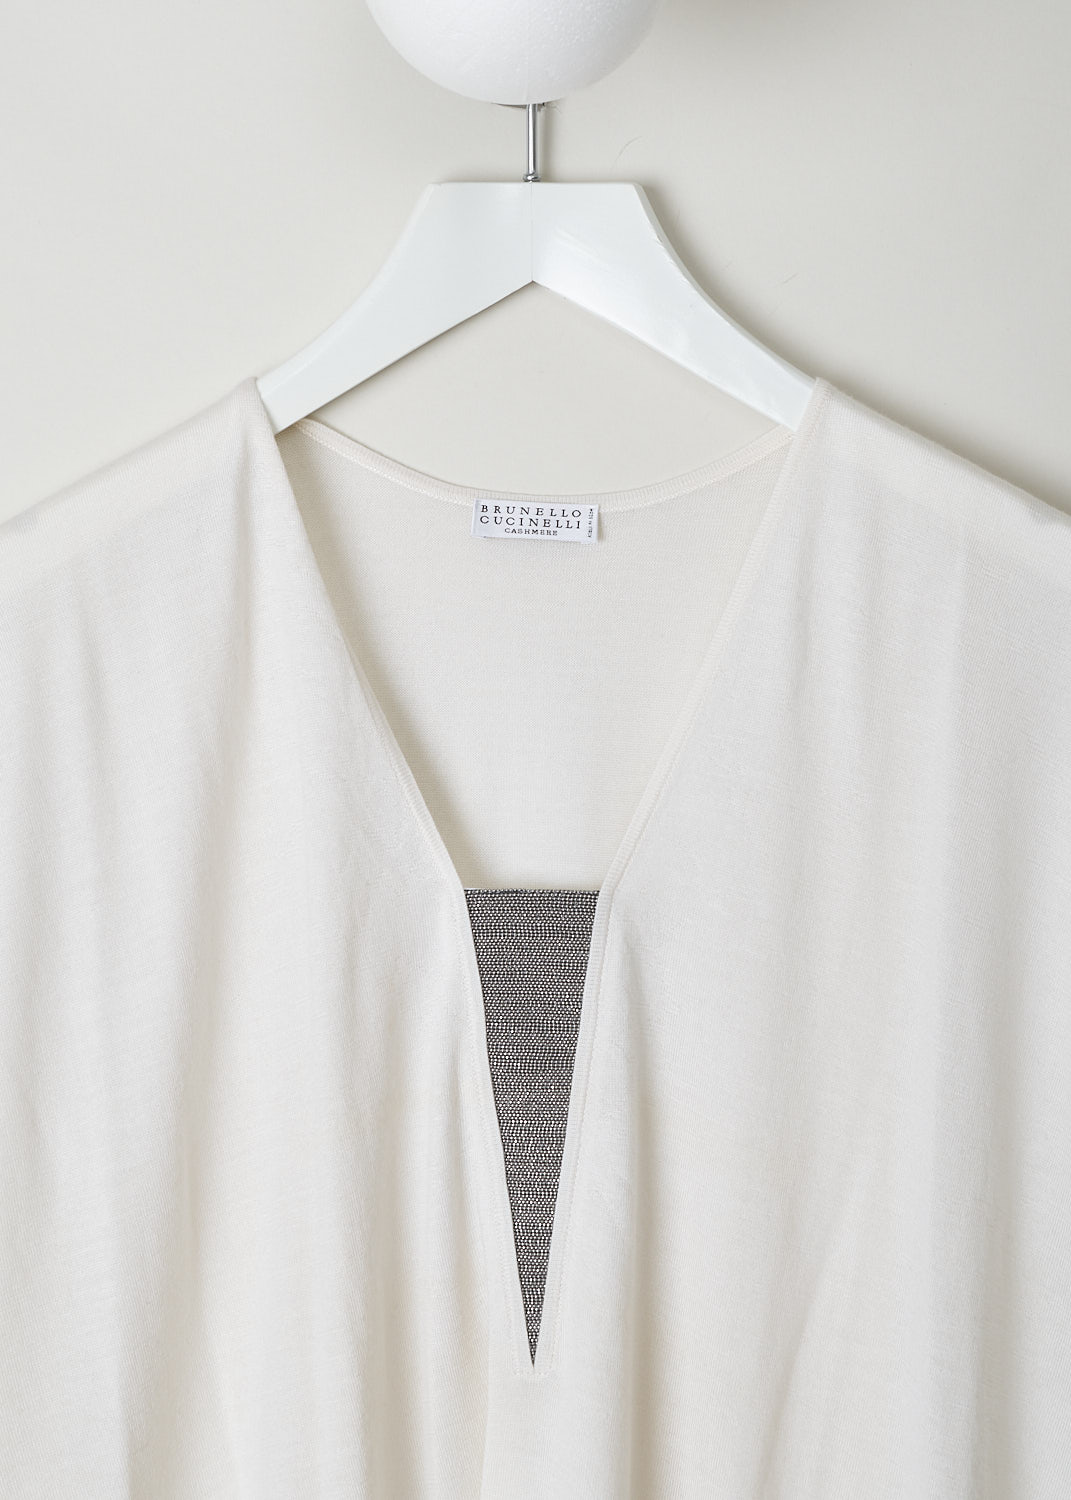 BRUNELLO CUCINELLI, CREAM COLORED TOP WITH MONILI V-NECKLINE, M13865822_C159, White, Detail, This cream colored cap sleeve top is made with a lightweight cashmere blend. The top has a deep V-neckline that is decorated with the brand's signature monili beads. The hemline has a ribbed finish. 
